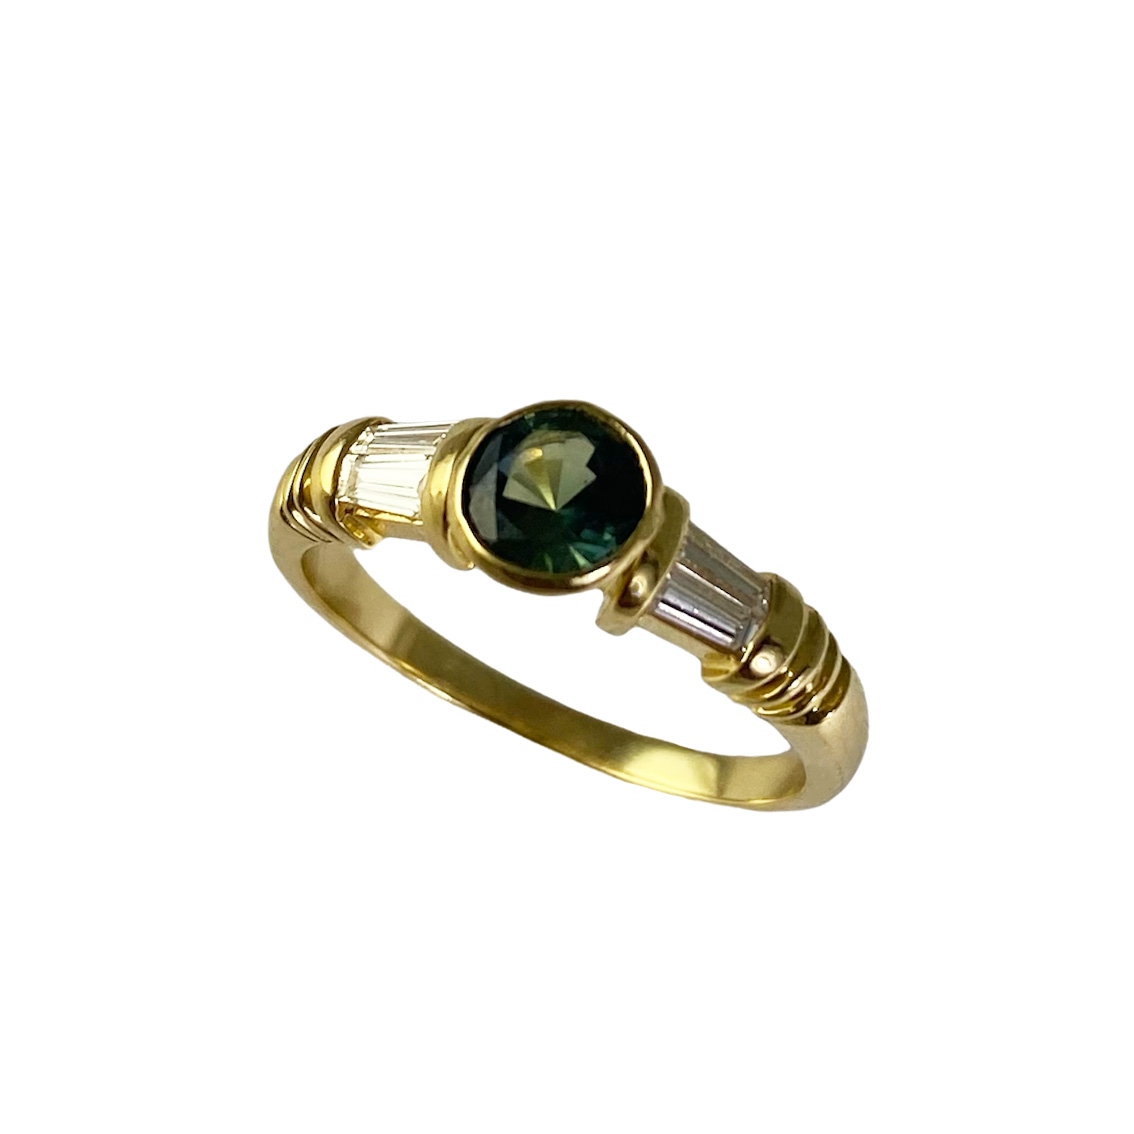 Contemporary 18ct. yellow gold, sapphire and diamond ring